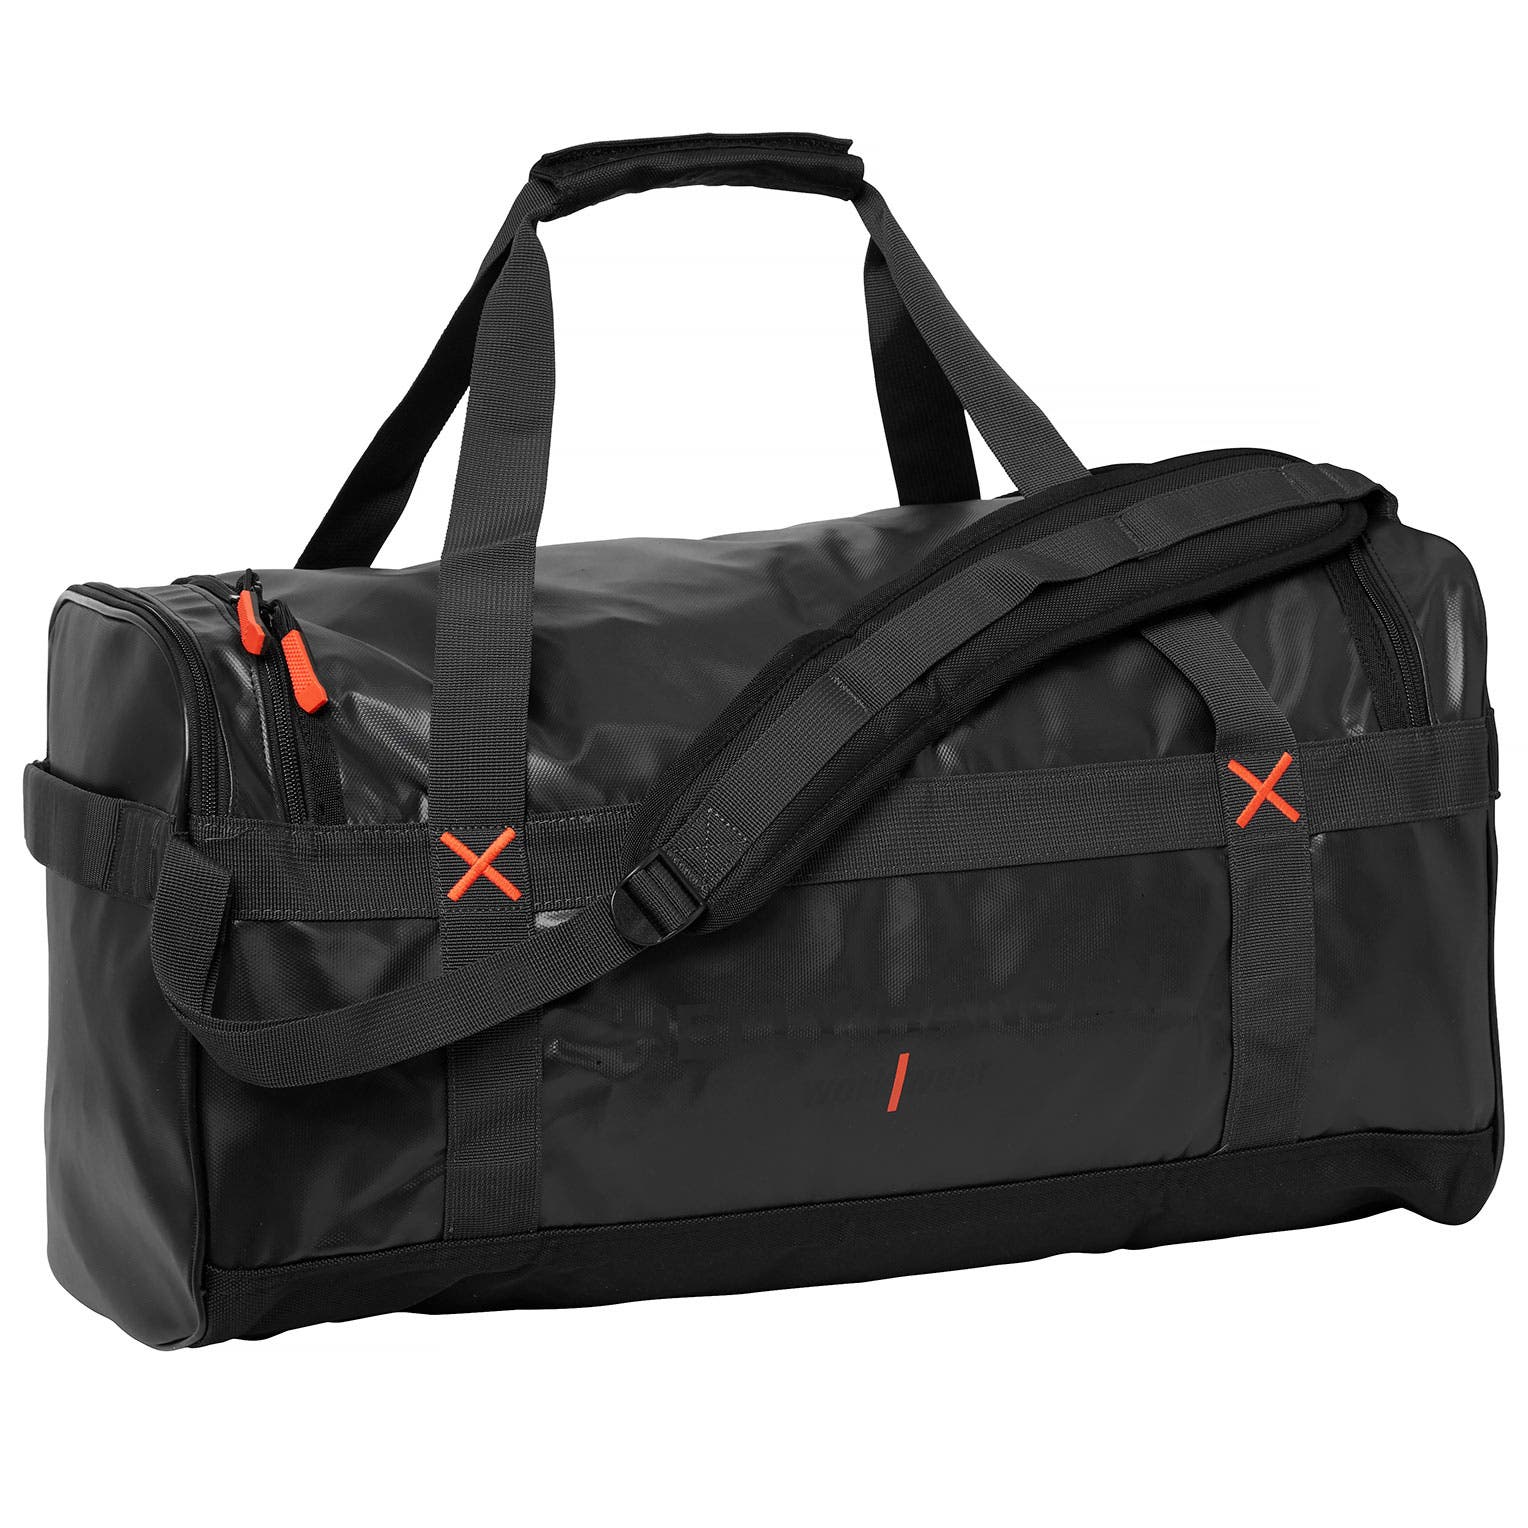 Helly Hansen Unisex 50-Liter Duffel Bag in Black from the front